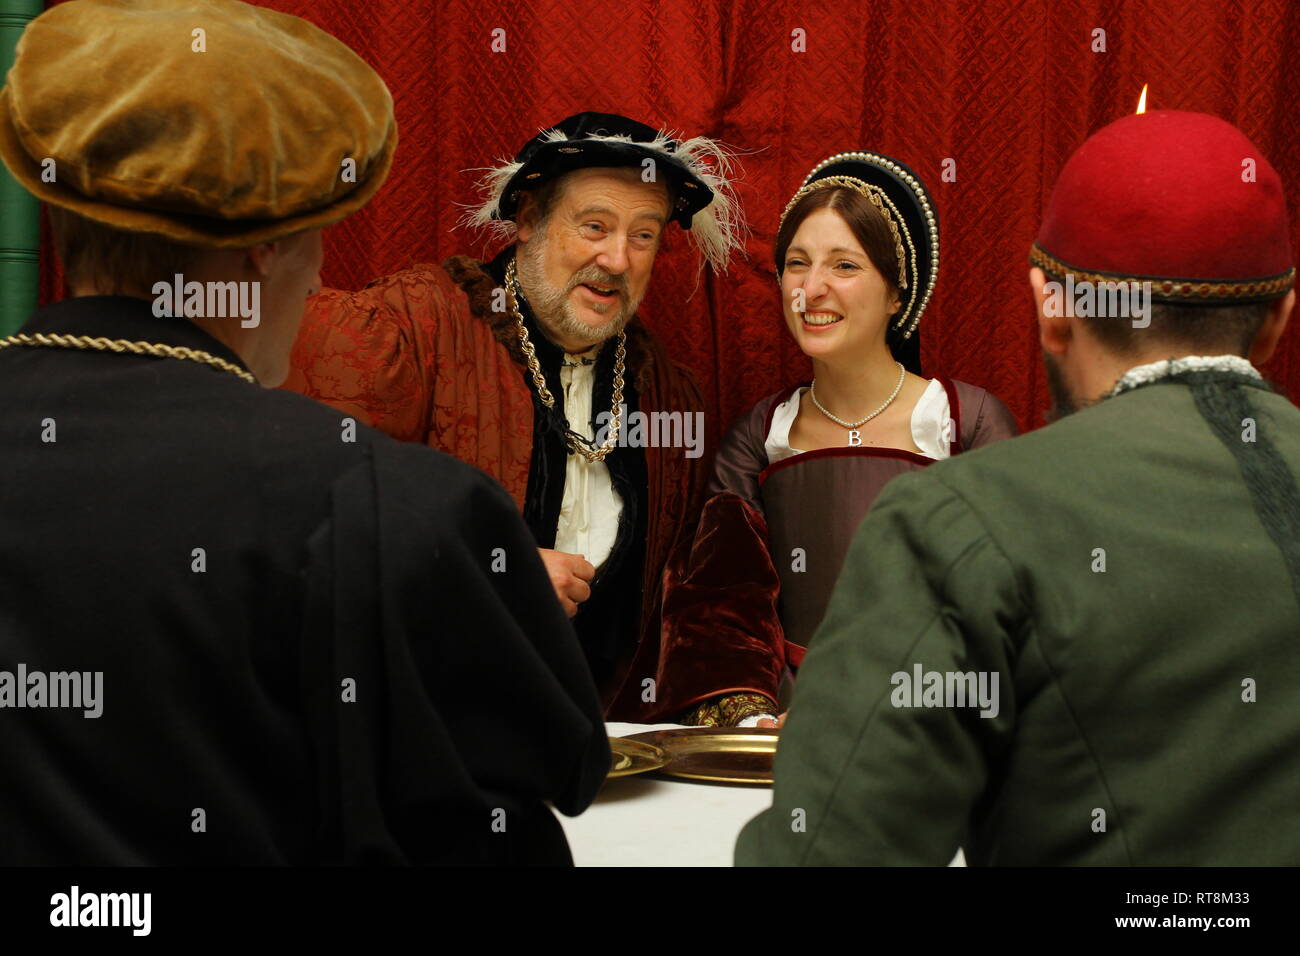 Henry VIII and Anne Boleyn are seated facing the camera- 2 men have their backs to it. they are having a meeting, their faces are animated Stock Photo